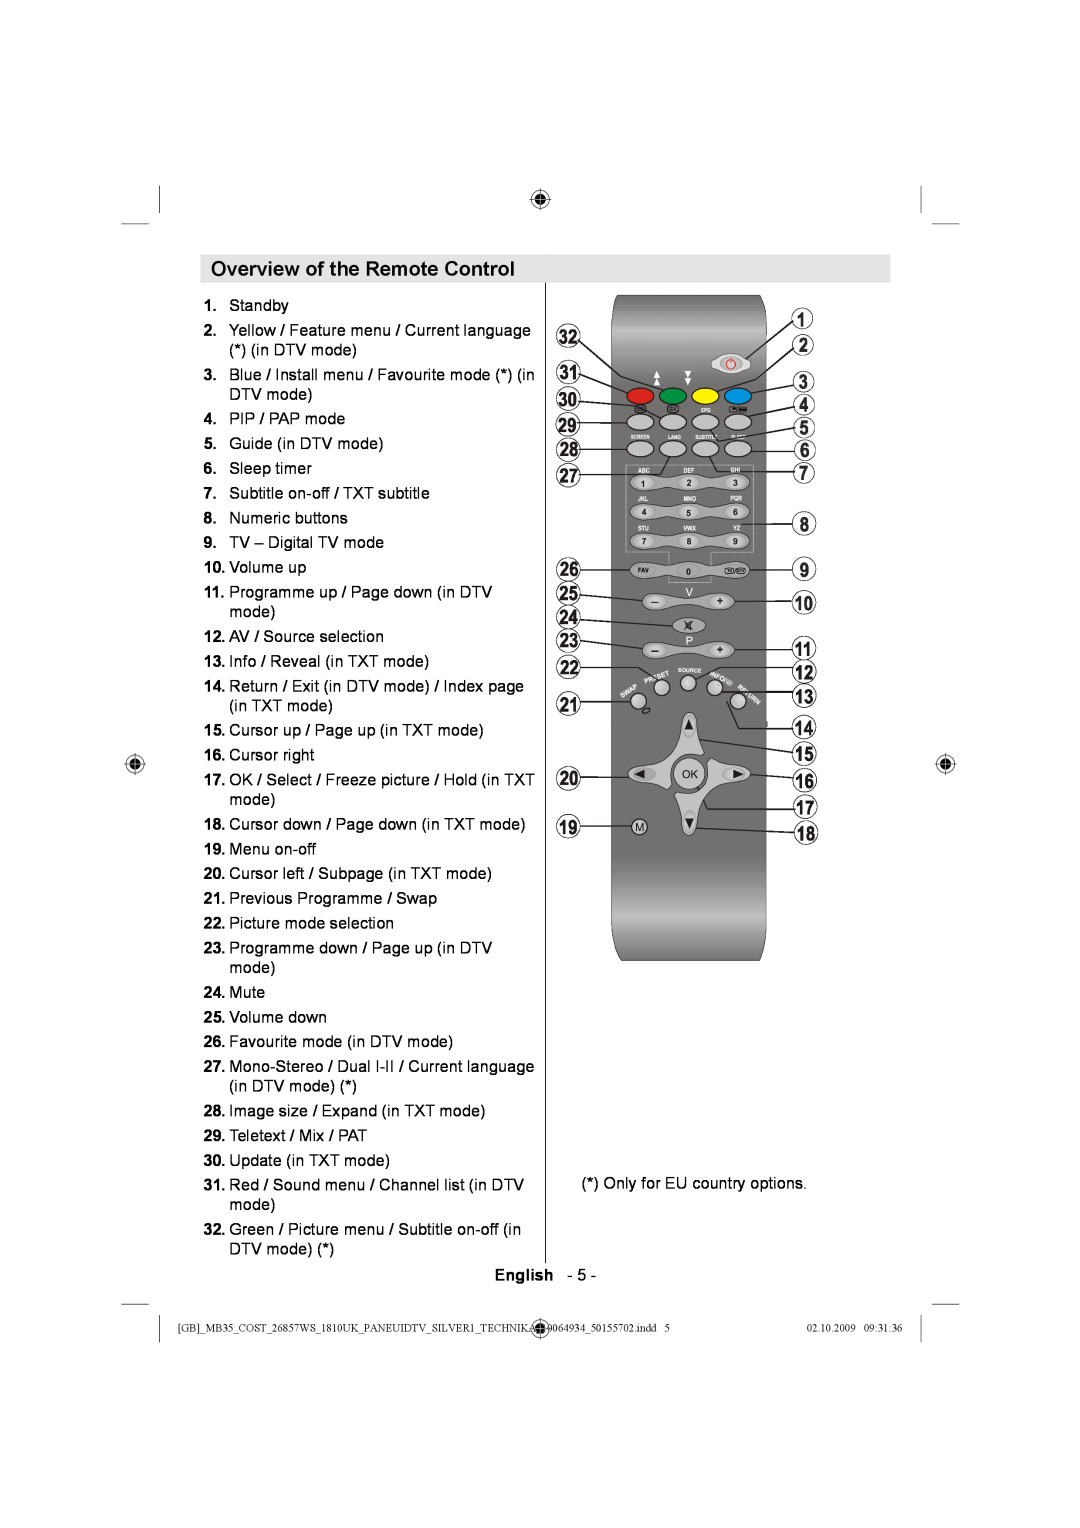 Technika LCD26-920 manual Overview of the Remote Control, English 